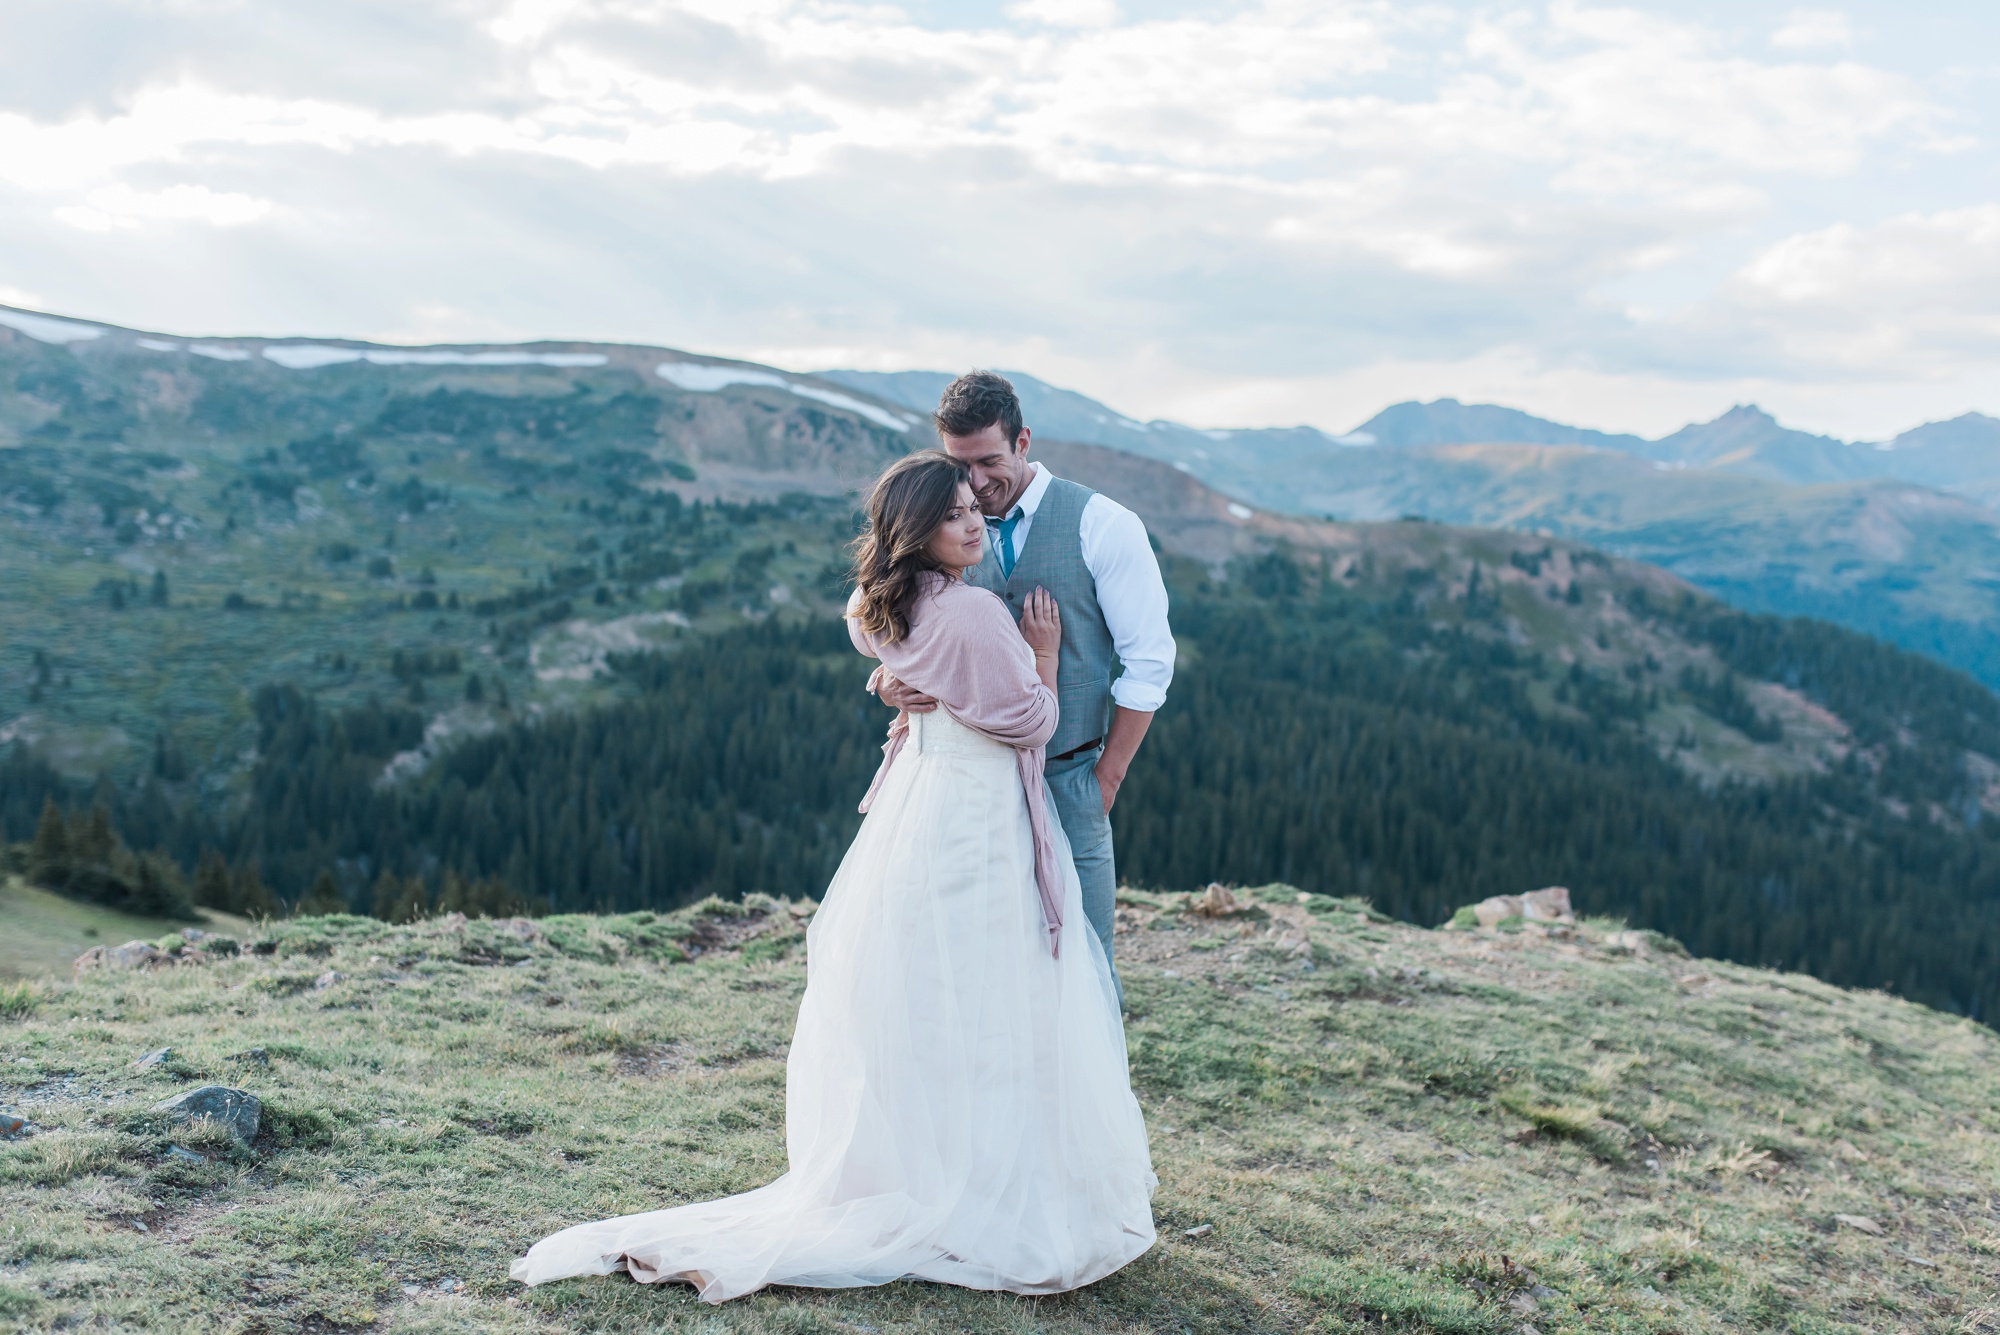 Newly married couple enjoying the beautiful mountain views during their intimate mountain top wedding